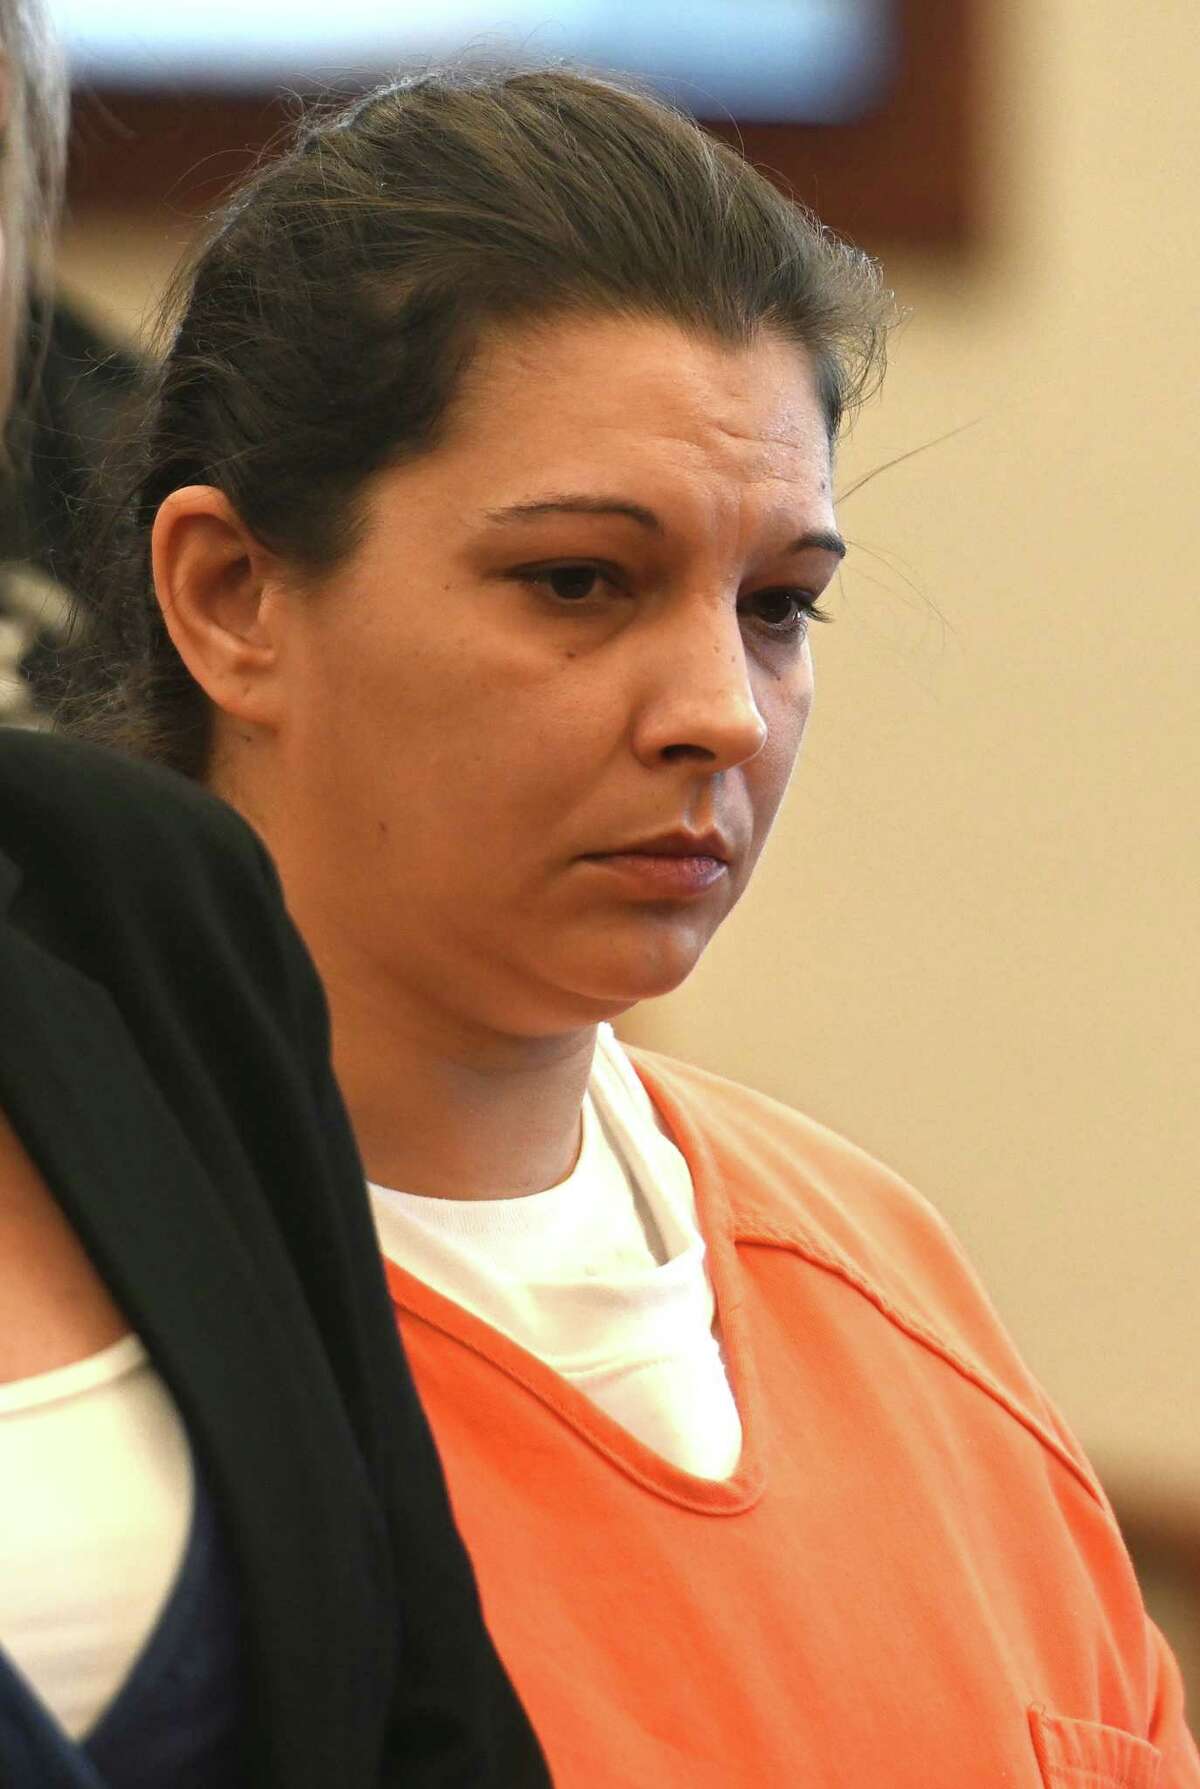 Heaven Puleski appears for her arraignment on a six-count indictment including a charge of second-degree murder in the death of her four-month-old son Rayen in Schenectady County Court Wednesday. Oct.23, 2018 in Schenectady, N.Y. (Skip Dickstein/Times Union)